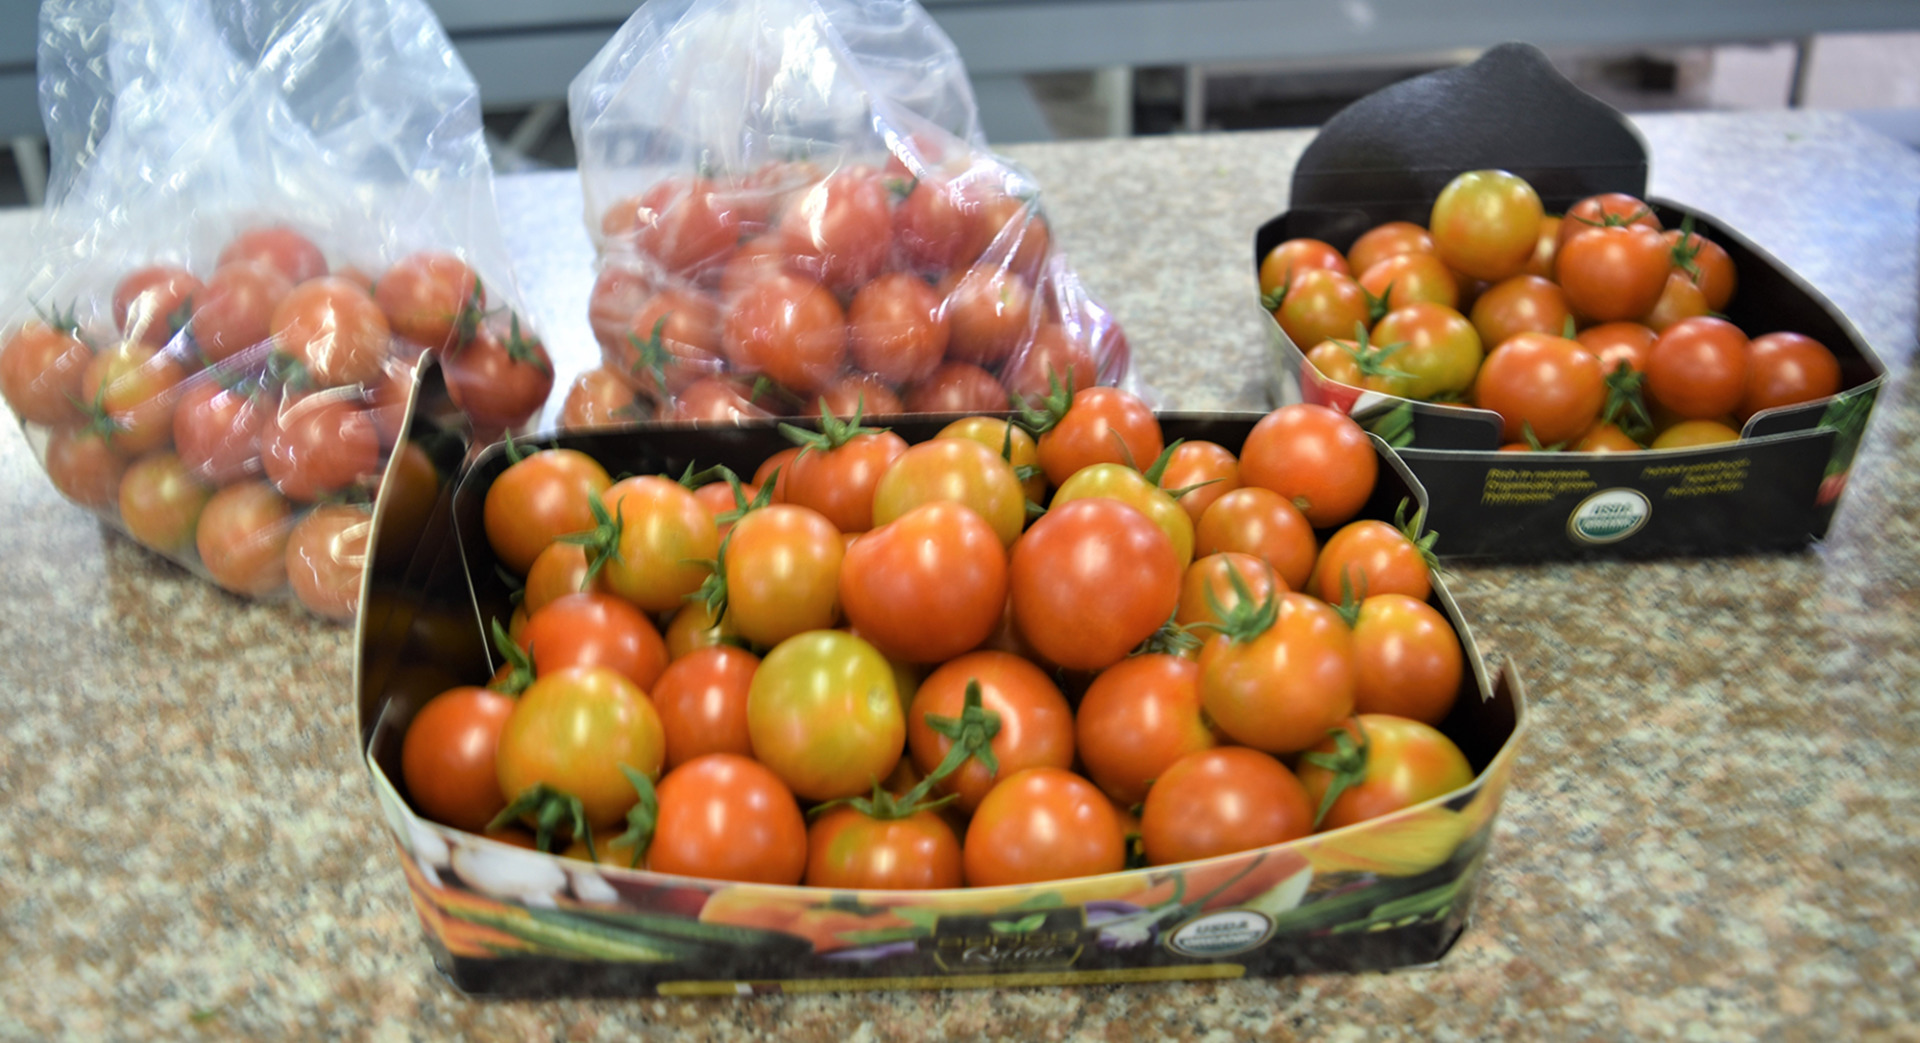 Texas A&M Research project aims to enhance tomato yield in Qatar